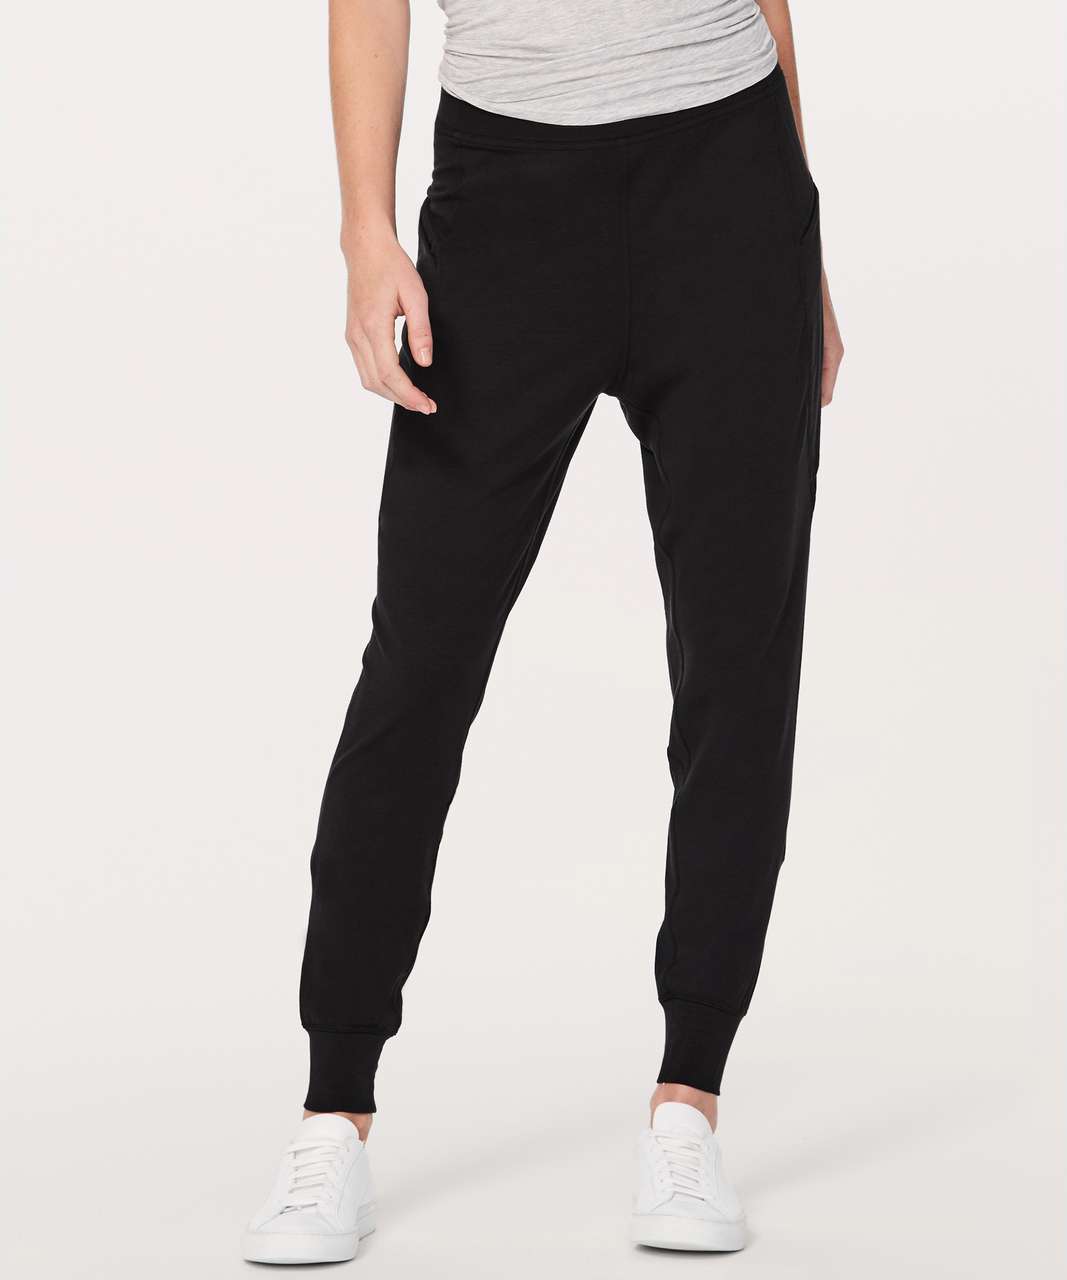 Lululemon Meant To Move Pant 27" - Black